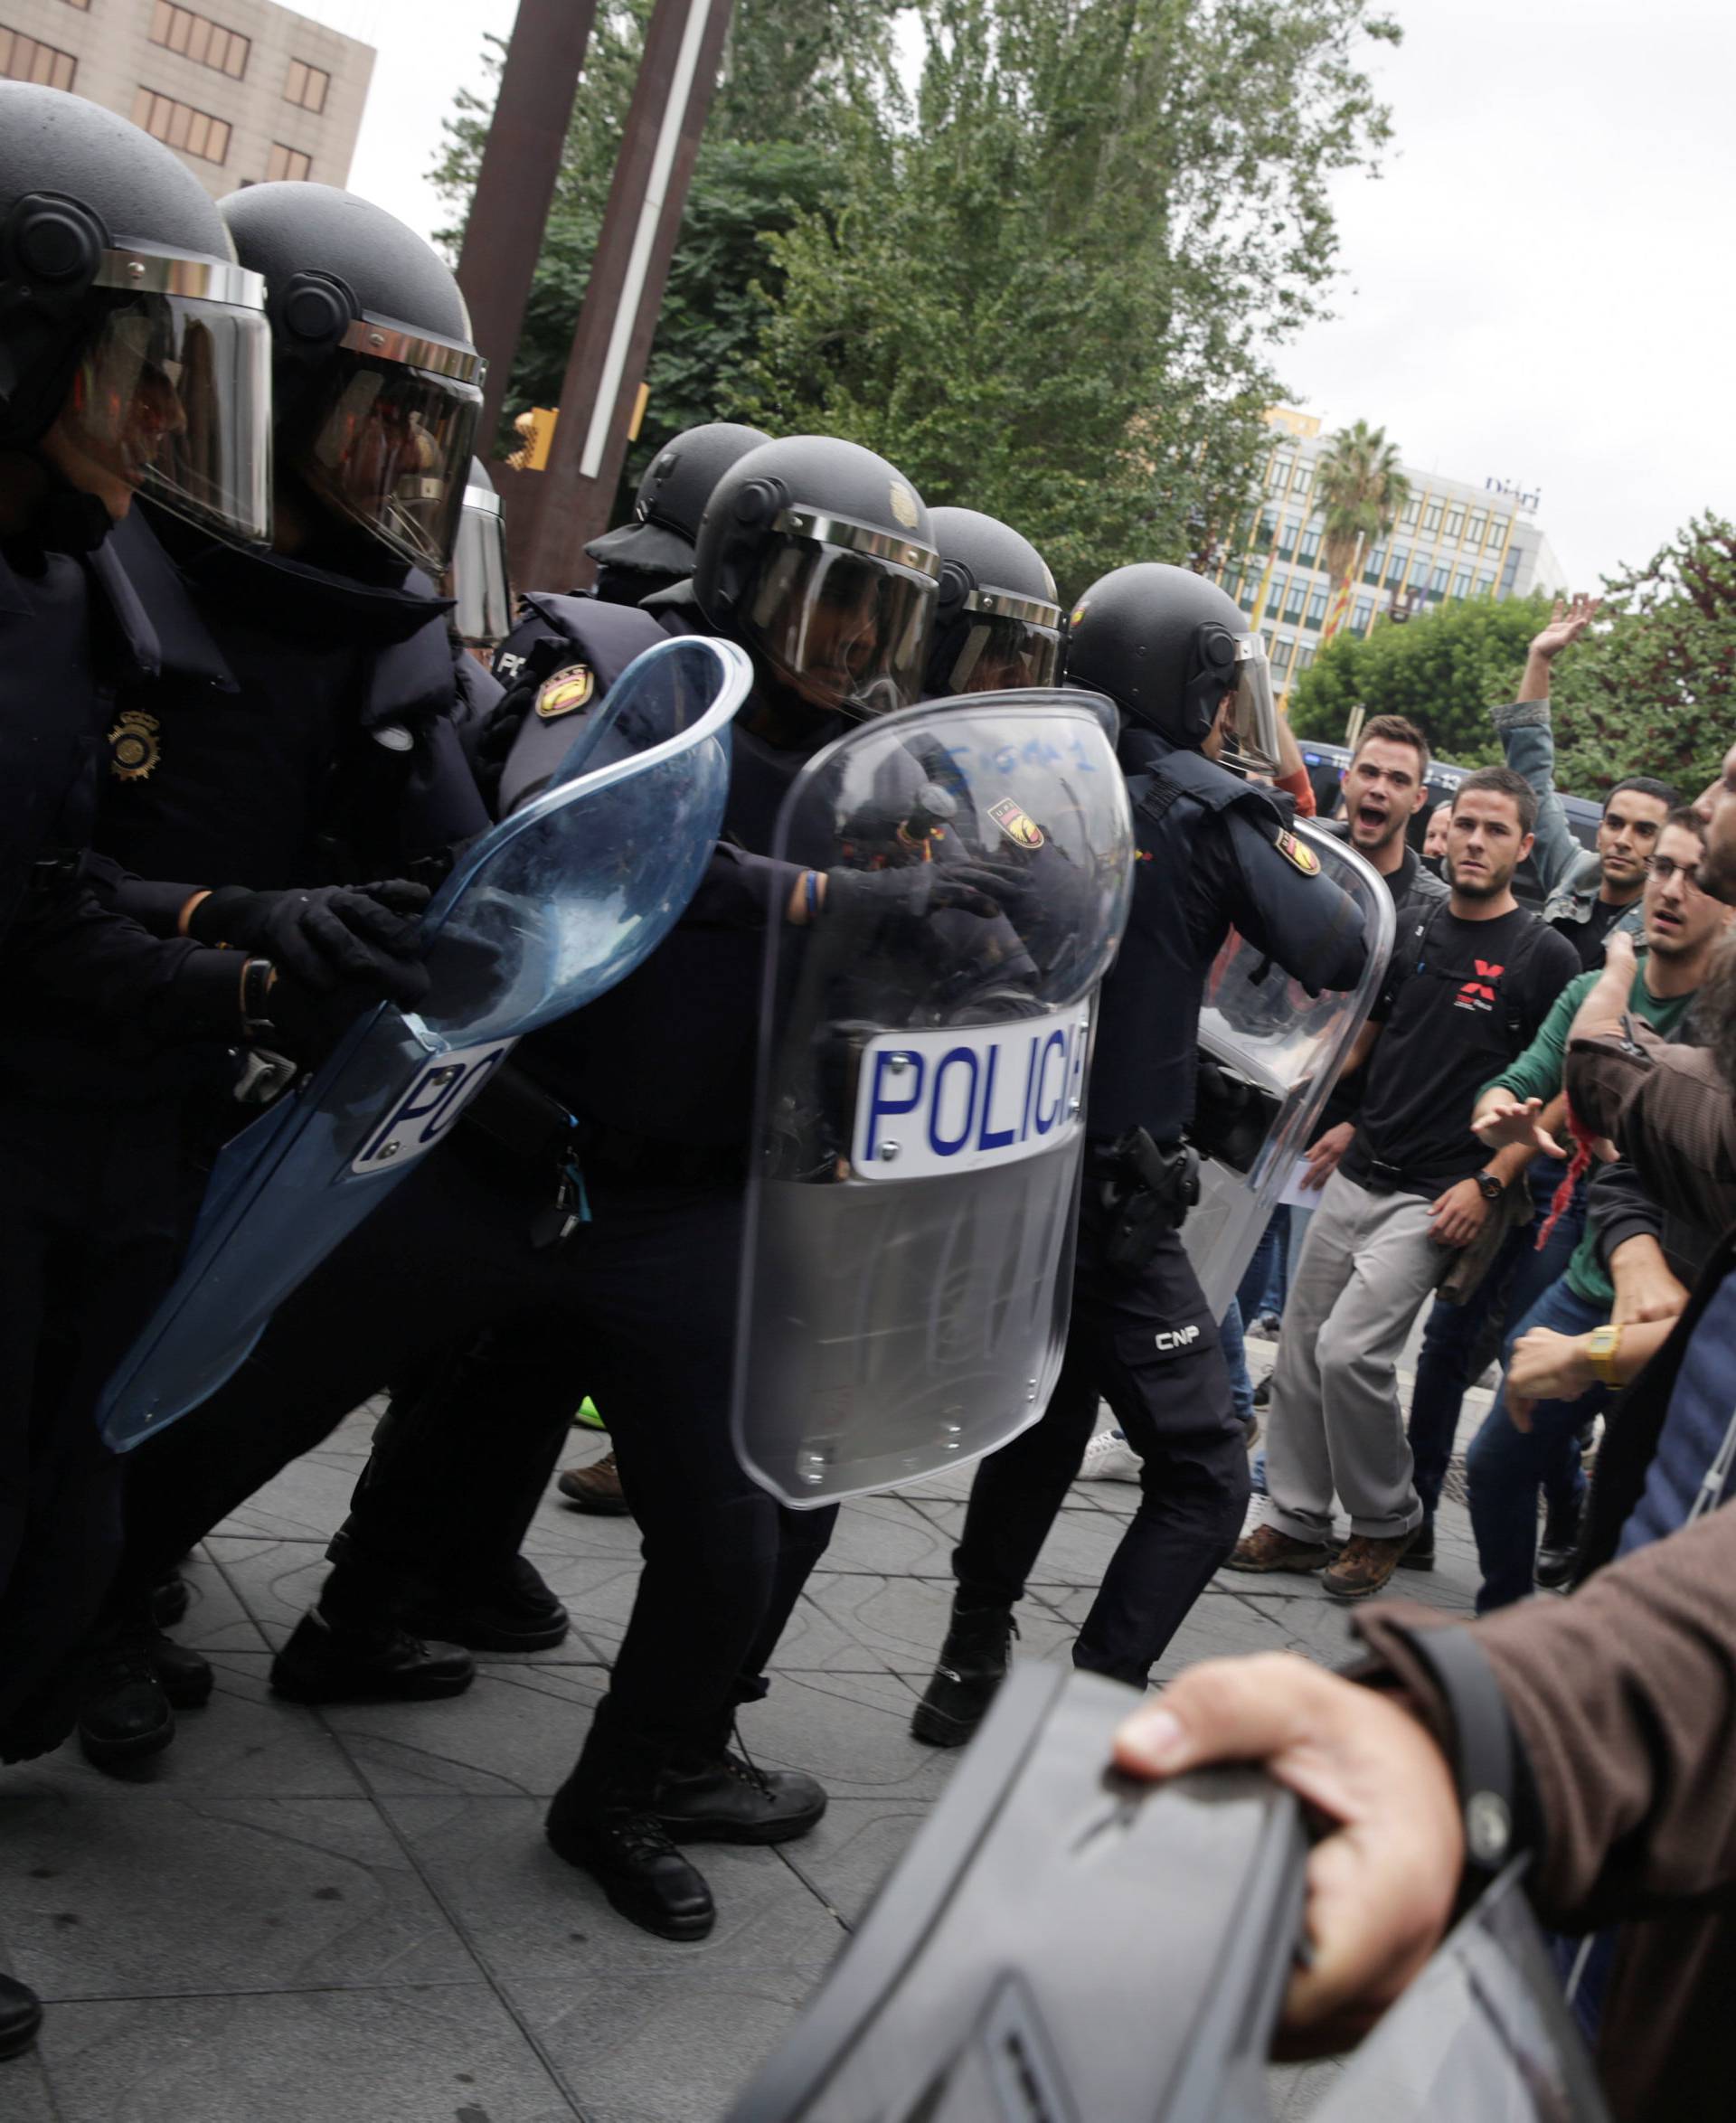 Spanish police confront people outside a polling station for the banned independence referendum in Tarragona